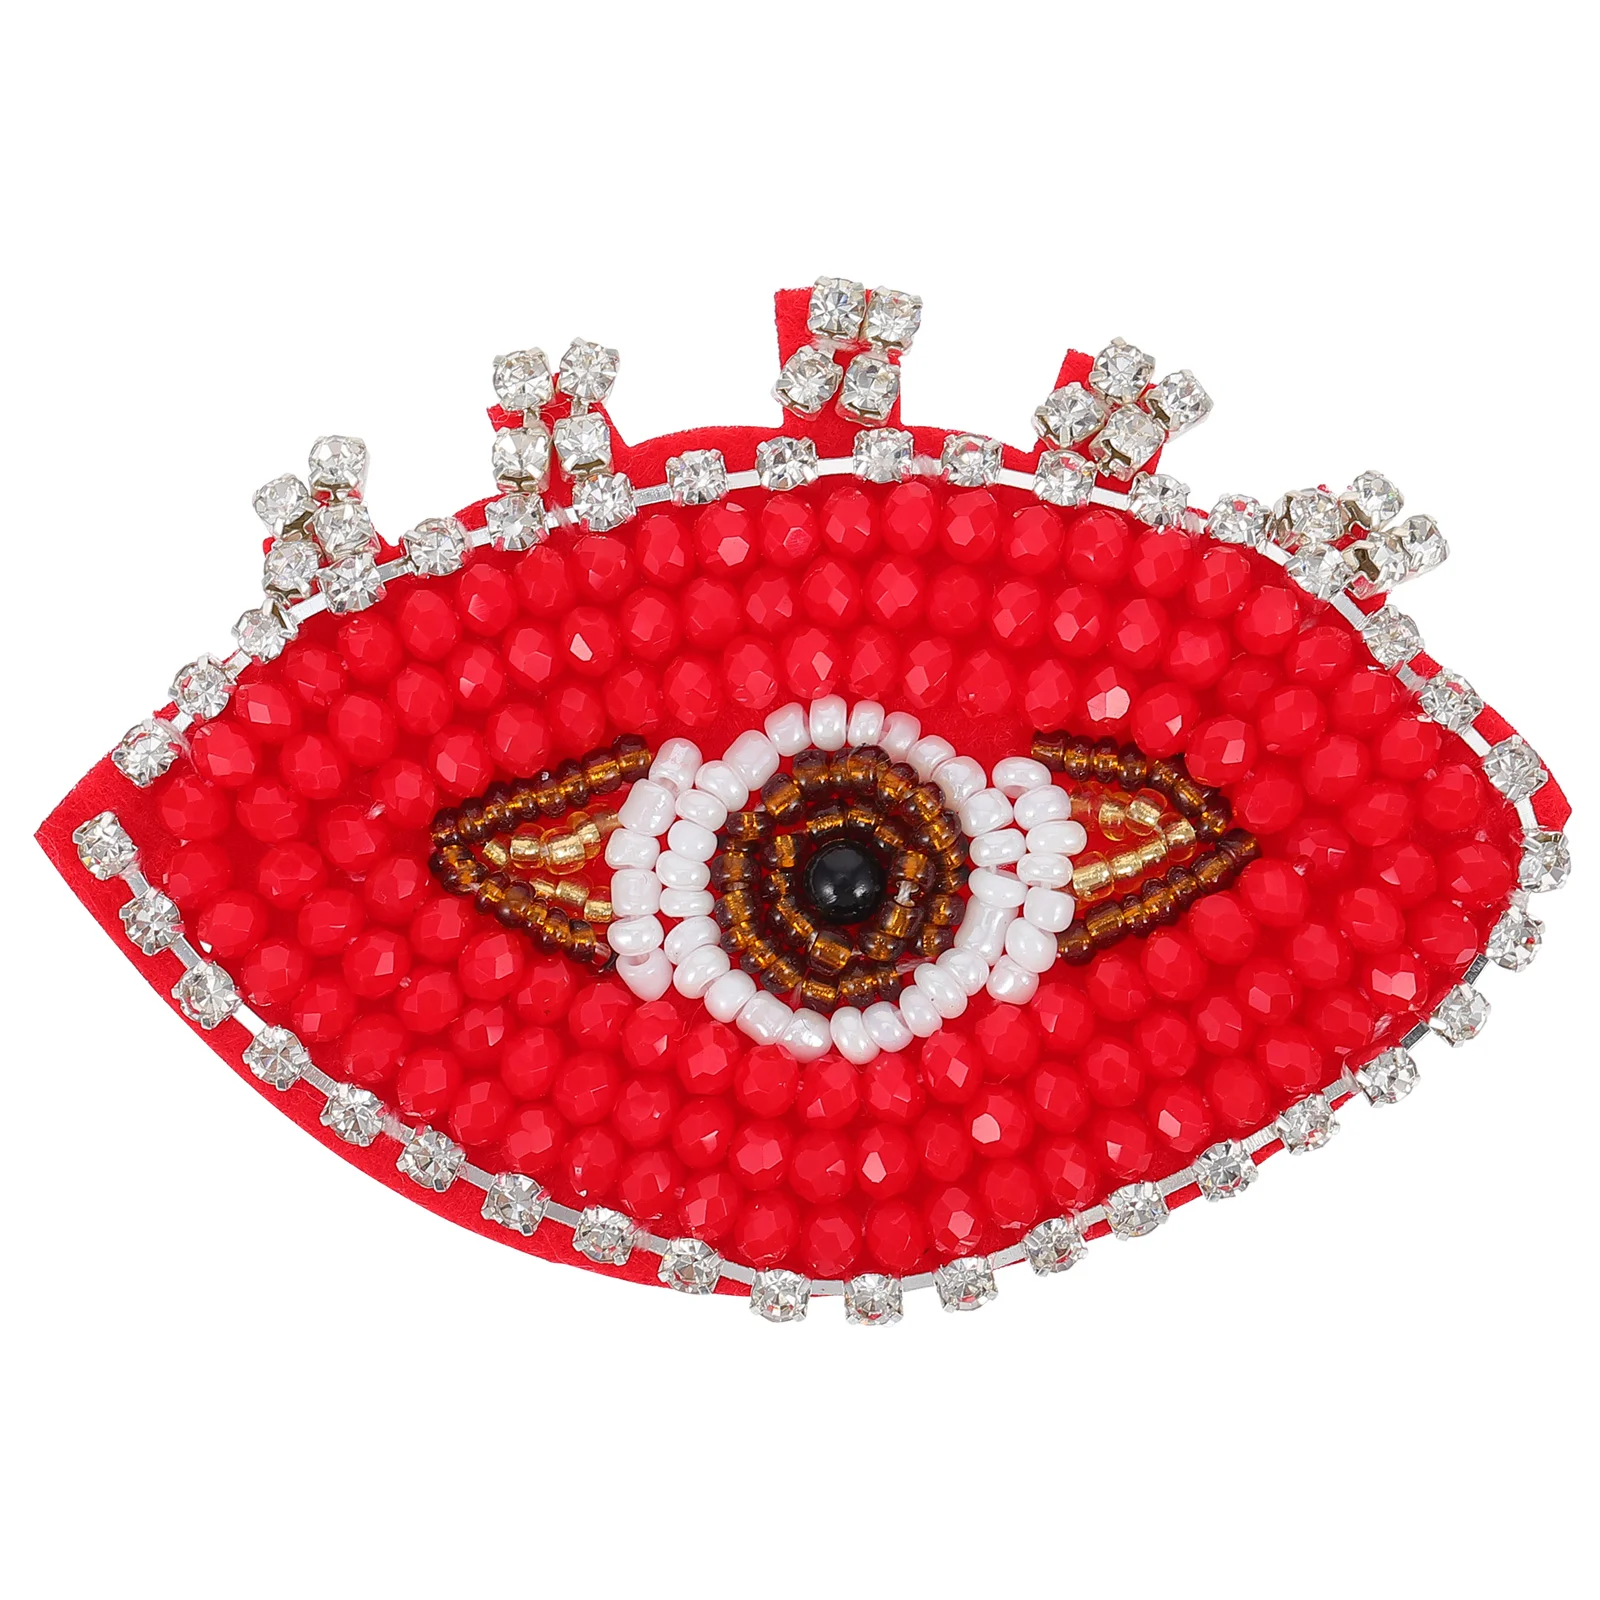 

Patch Clothing Diy Beaded Badge Embroidered Patches Sew Eyes Clothes Applique Crafts Evil Motif Embroidery Eye Sticker Sewing